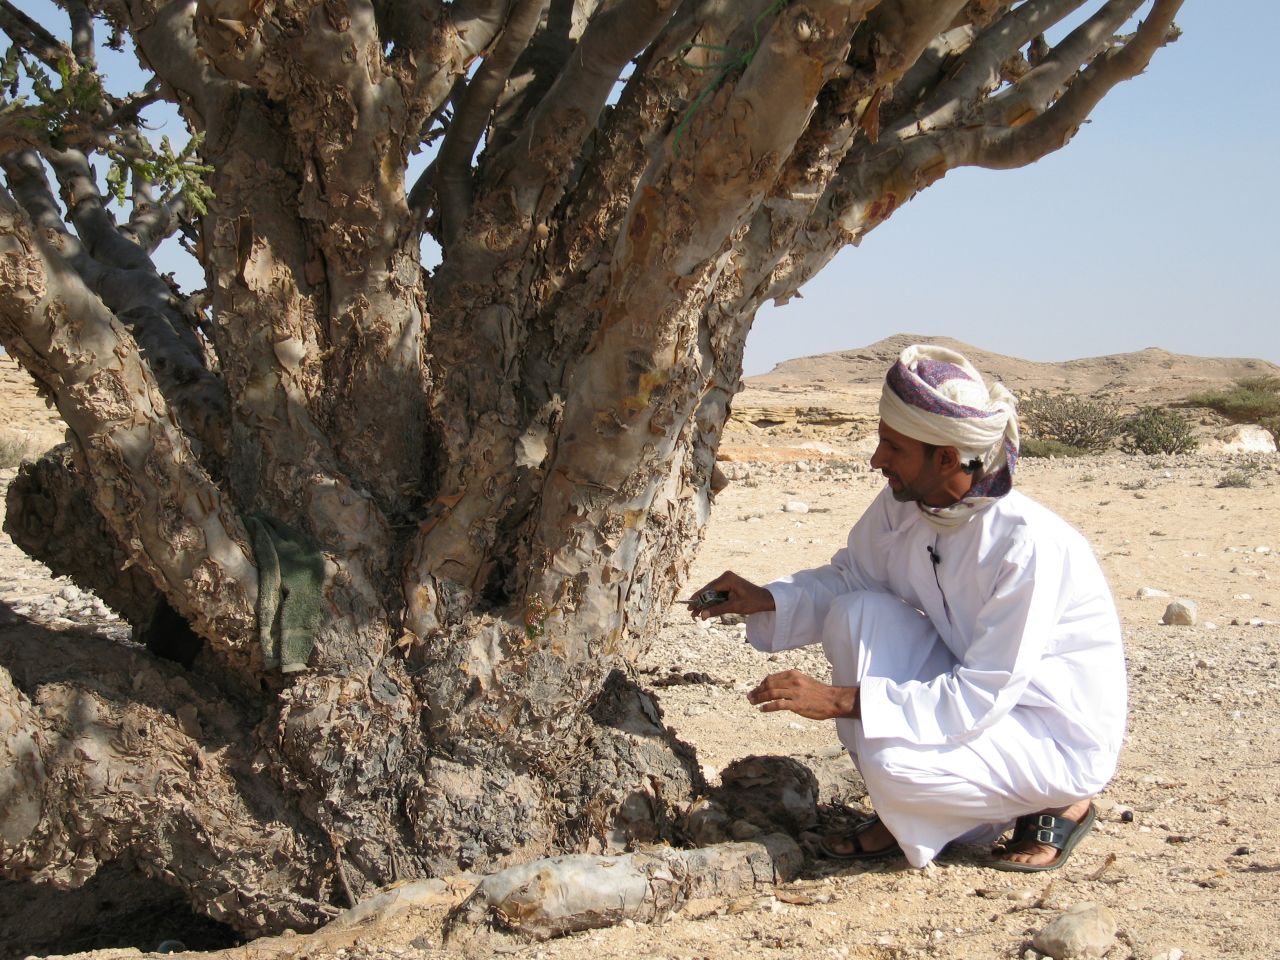 Unlike the rest of Oman, Salalah's summer temperatures are actually tolerable, thanks to the cooling monsoon season. A UNESCO-listed frankincense plantation and biblical sites are among the area's popular attractions.